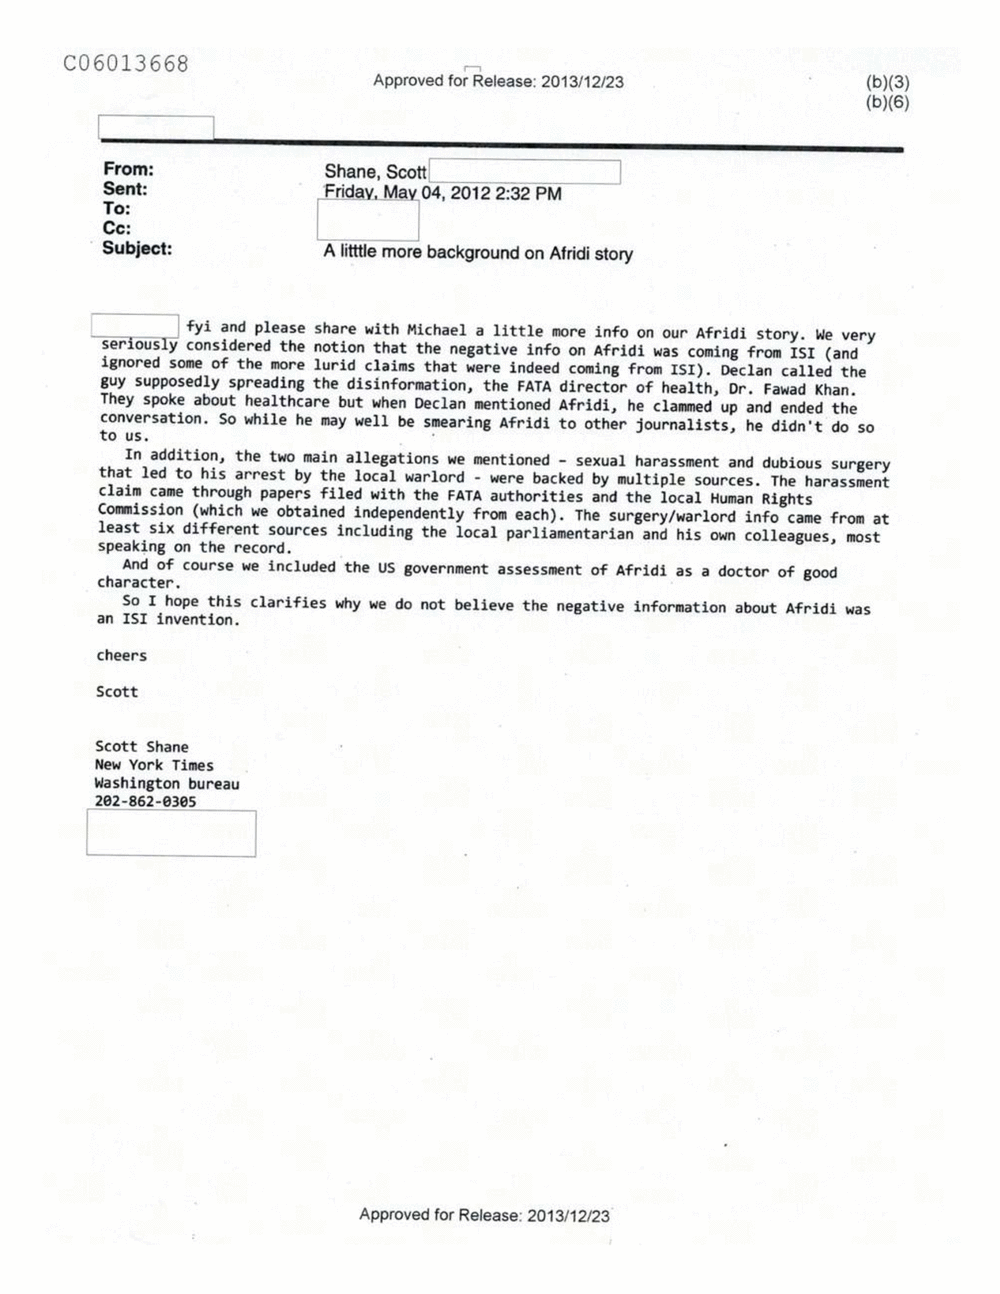 Page 516 from Email Correspondence Between Reporters and CIA Flacks